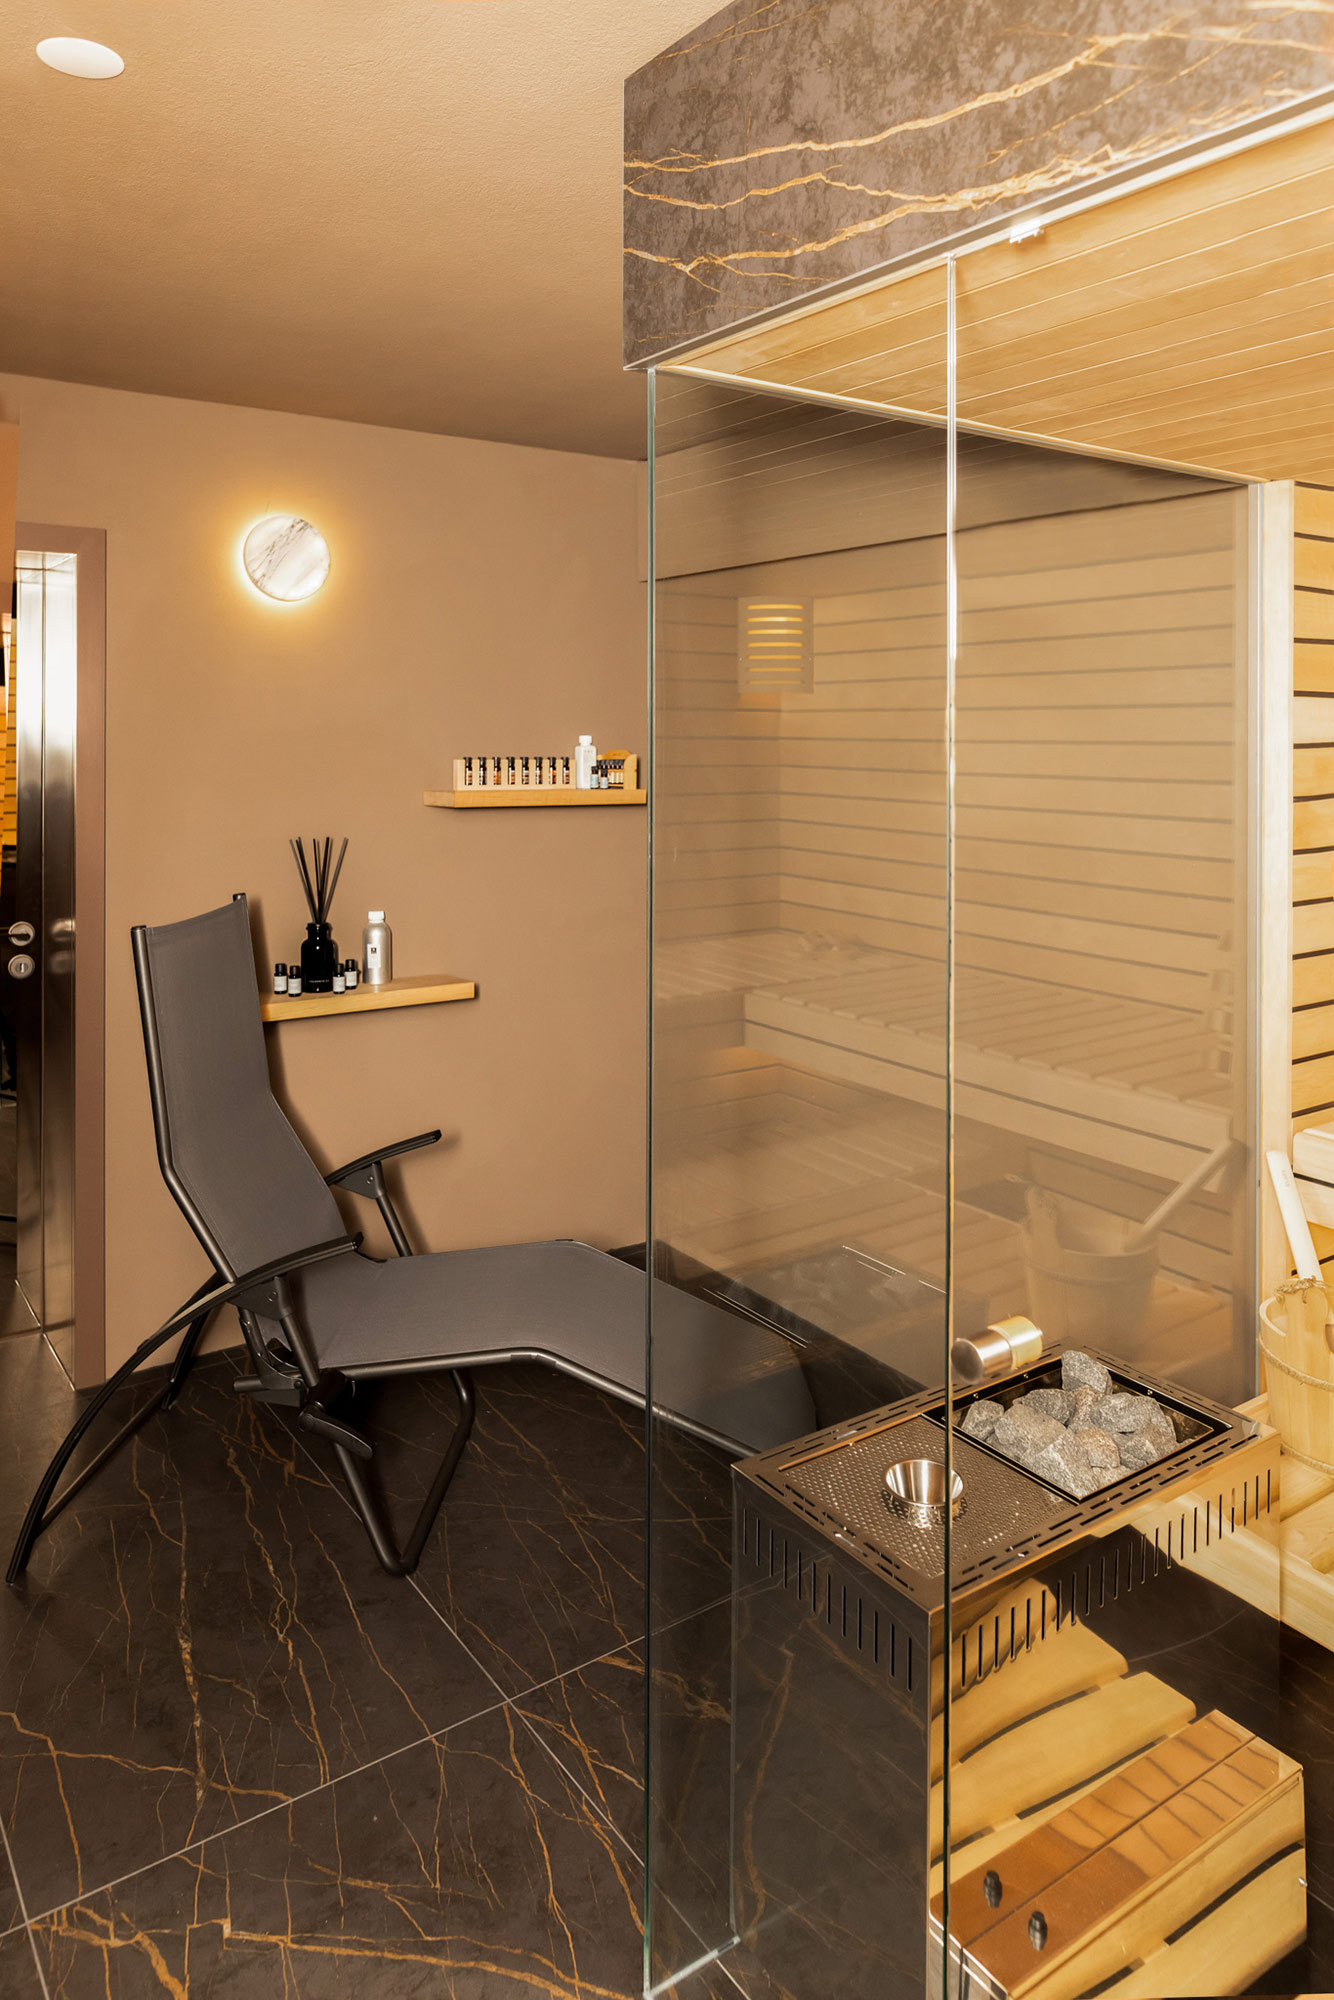 Image of sauna suiza laurent 1 in This sauna reaches its full wellness potential thanks to Dekton - Cosentino